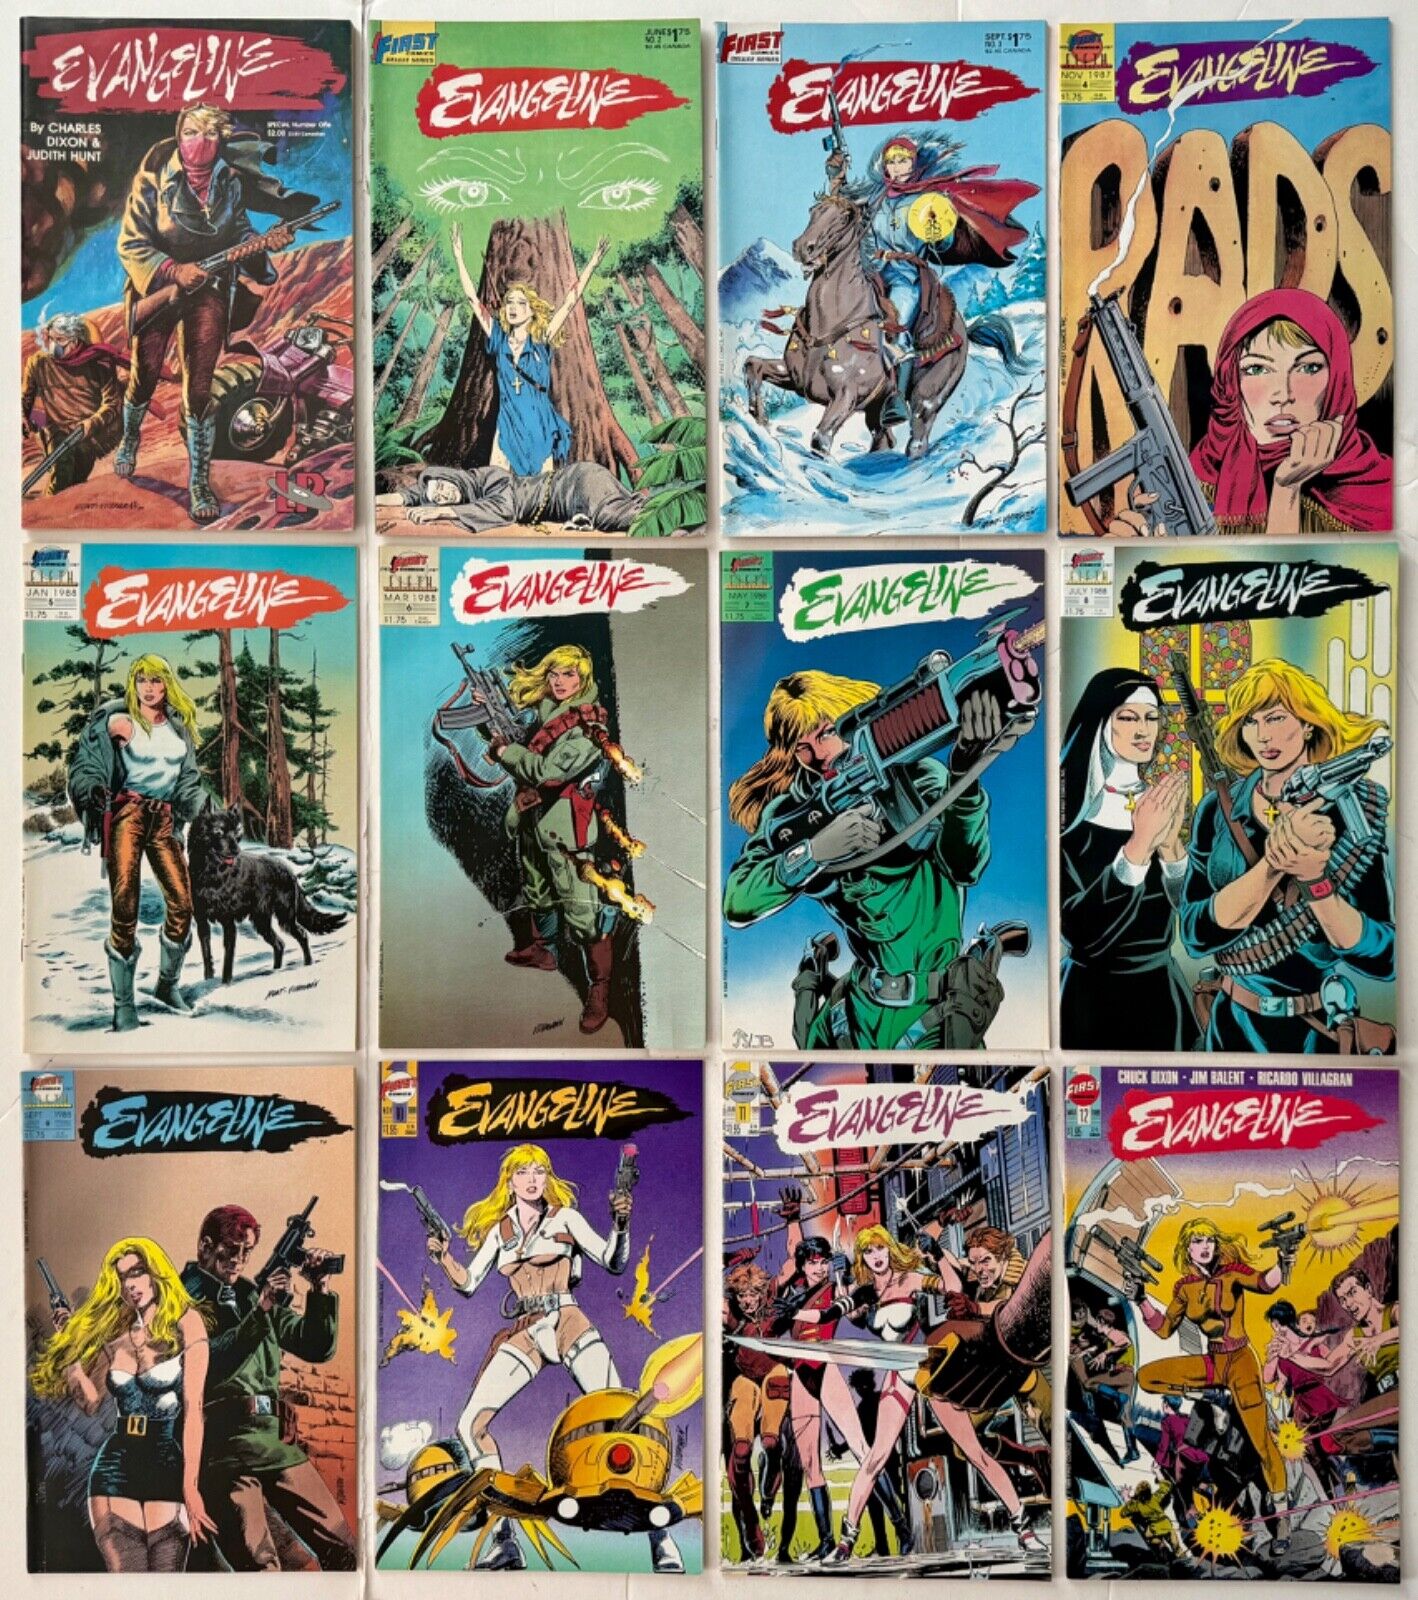 Evangeline Special 1 and 2-12 Almost Complete Set - First Comics 1986-1989